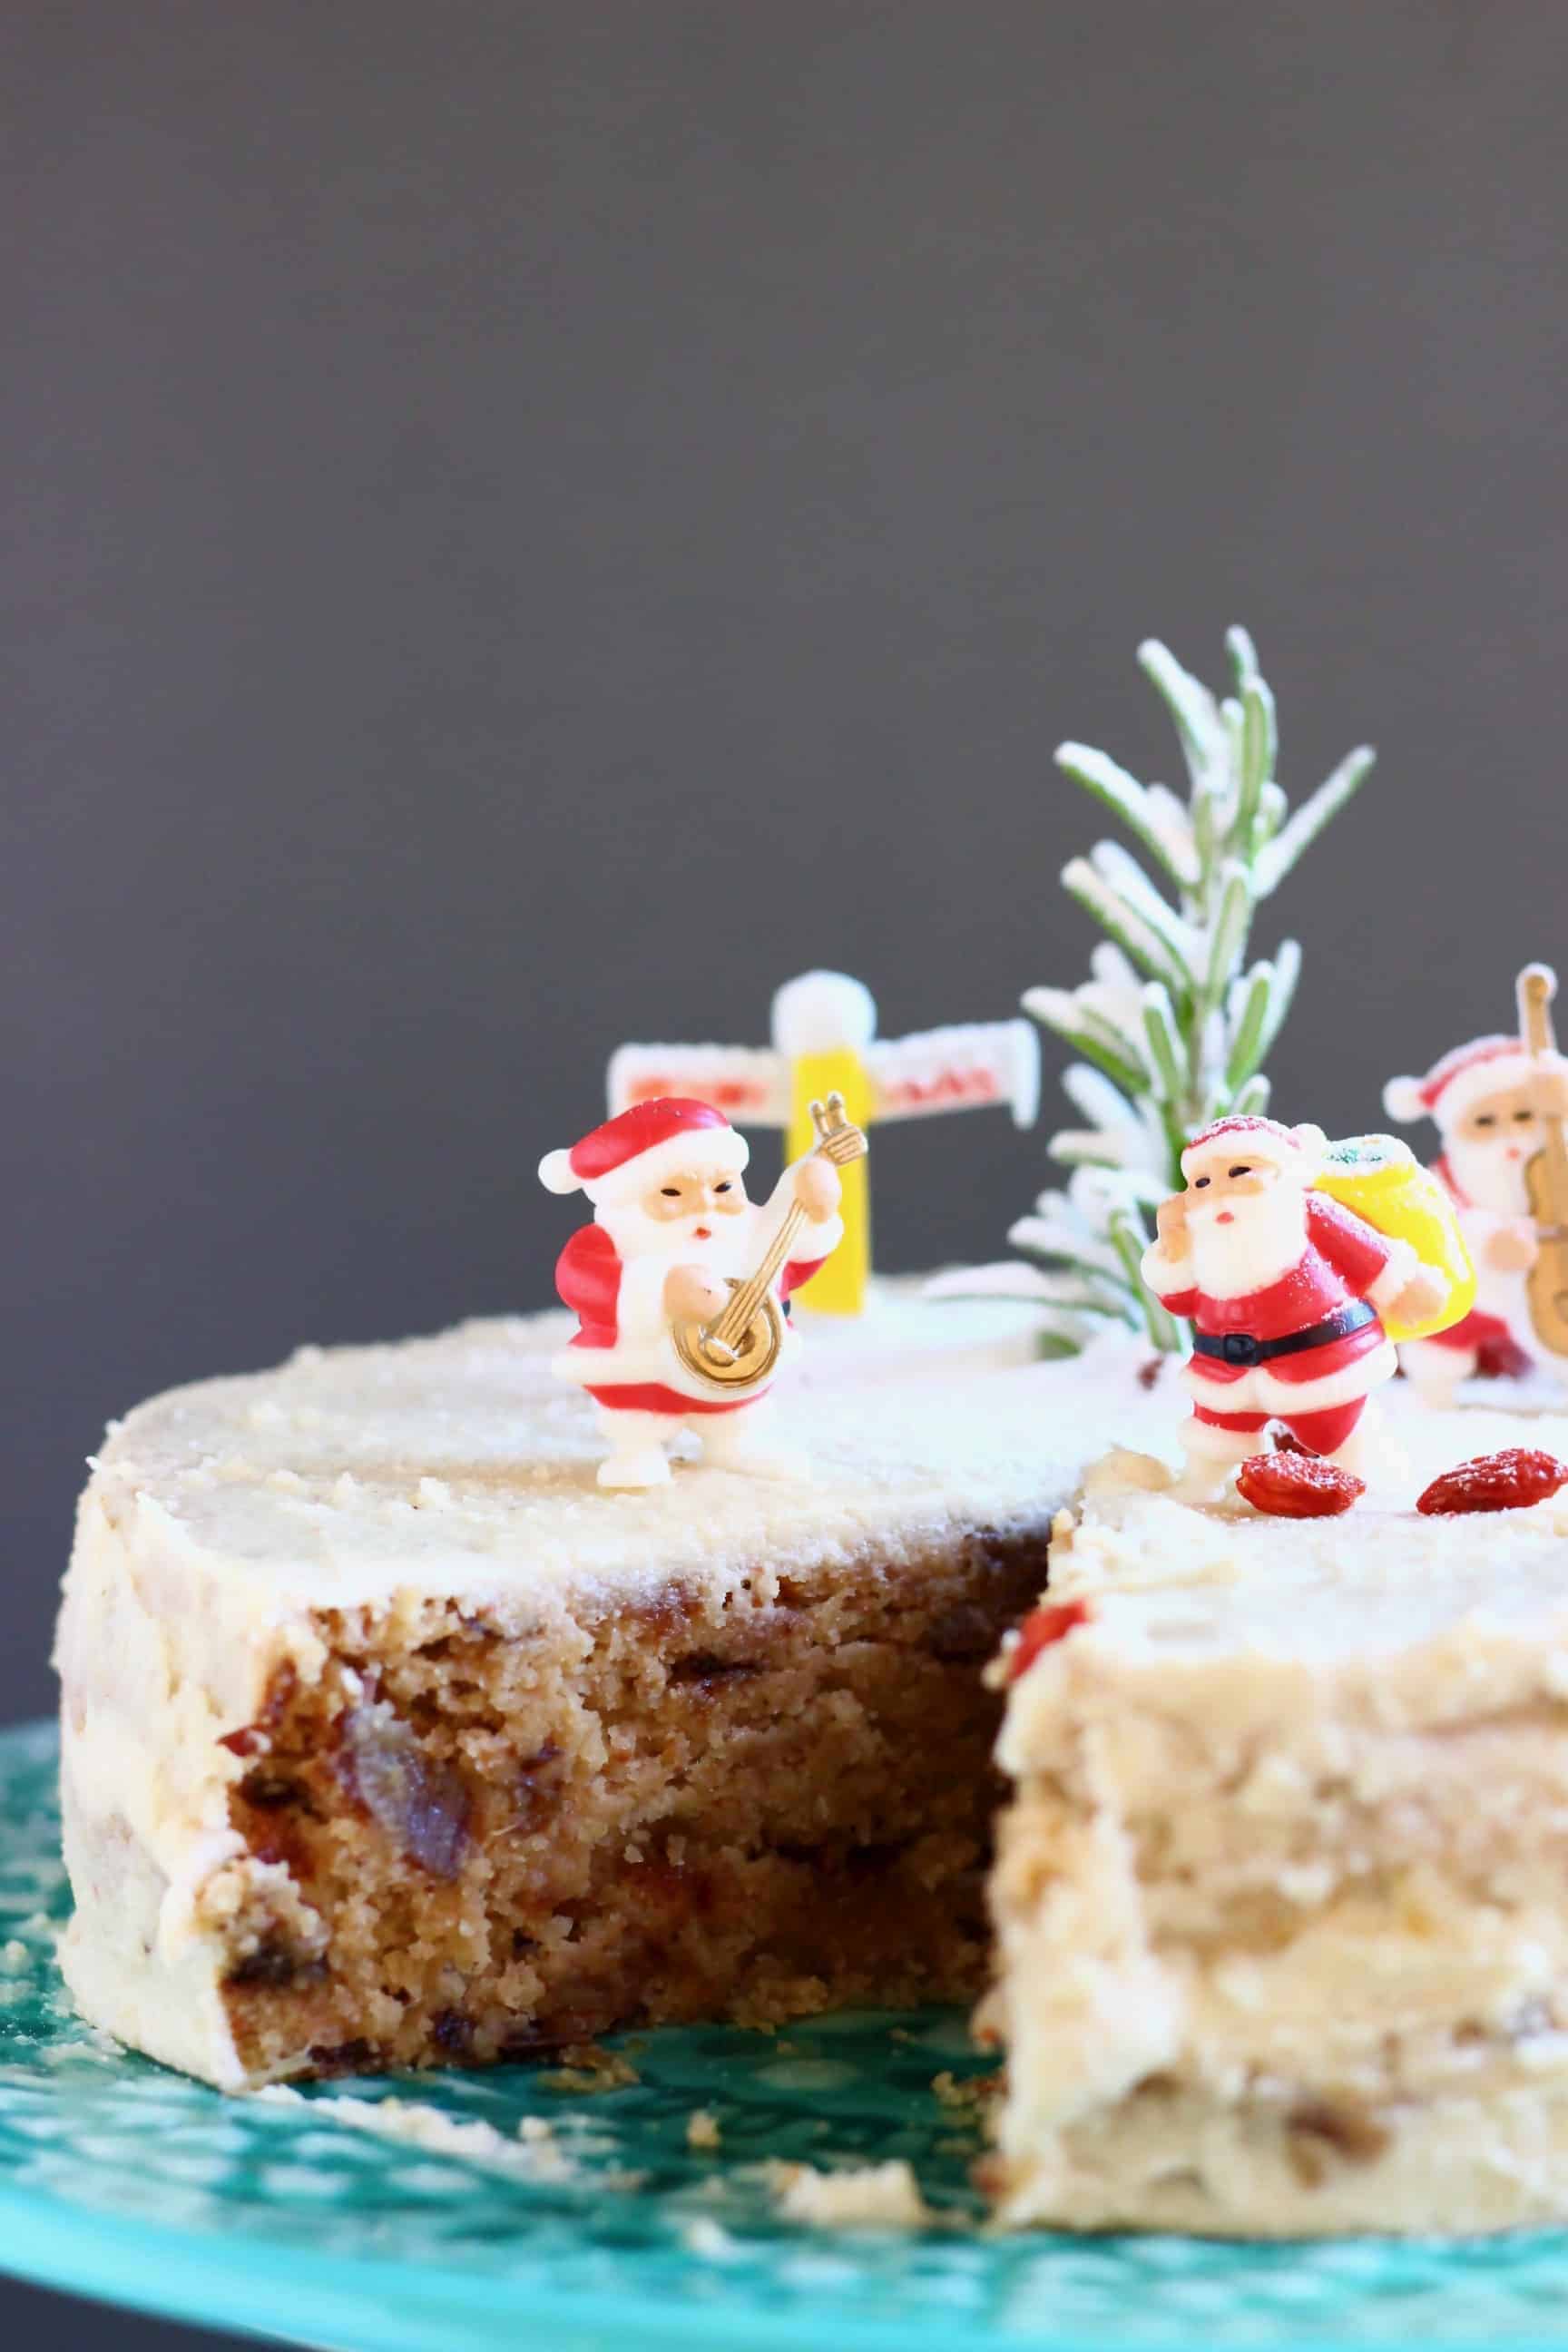 A fruit cake covered in white buttercream with a slice taken out of it topped with plastic santas against a grey background